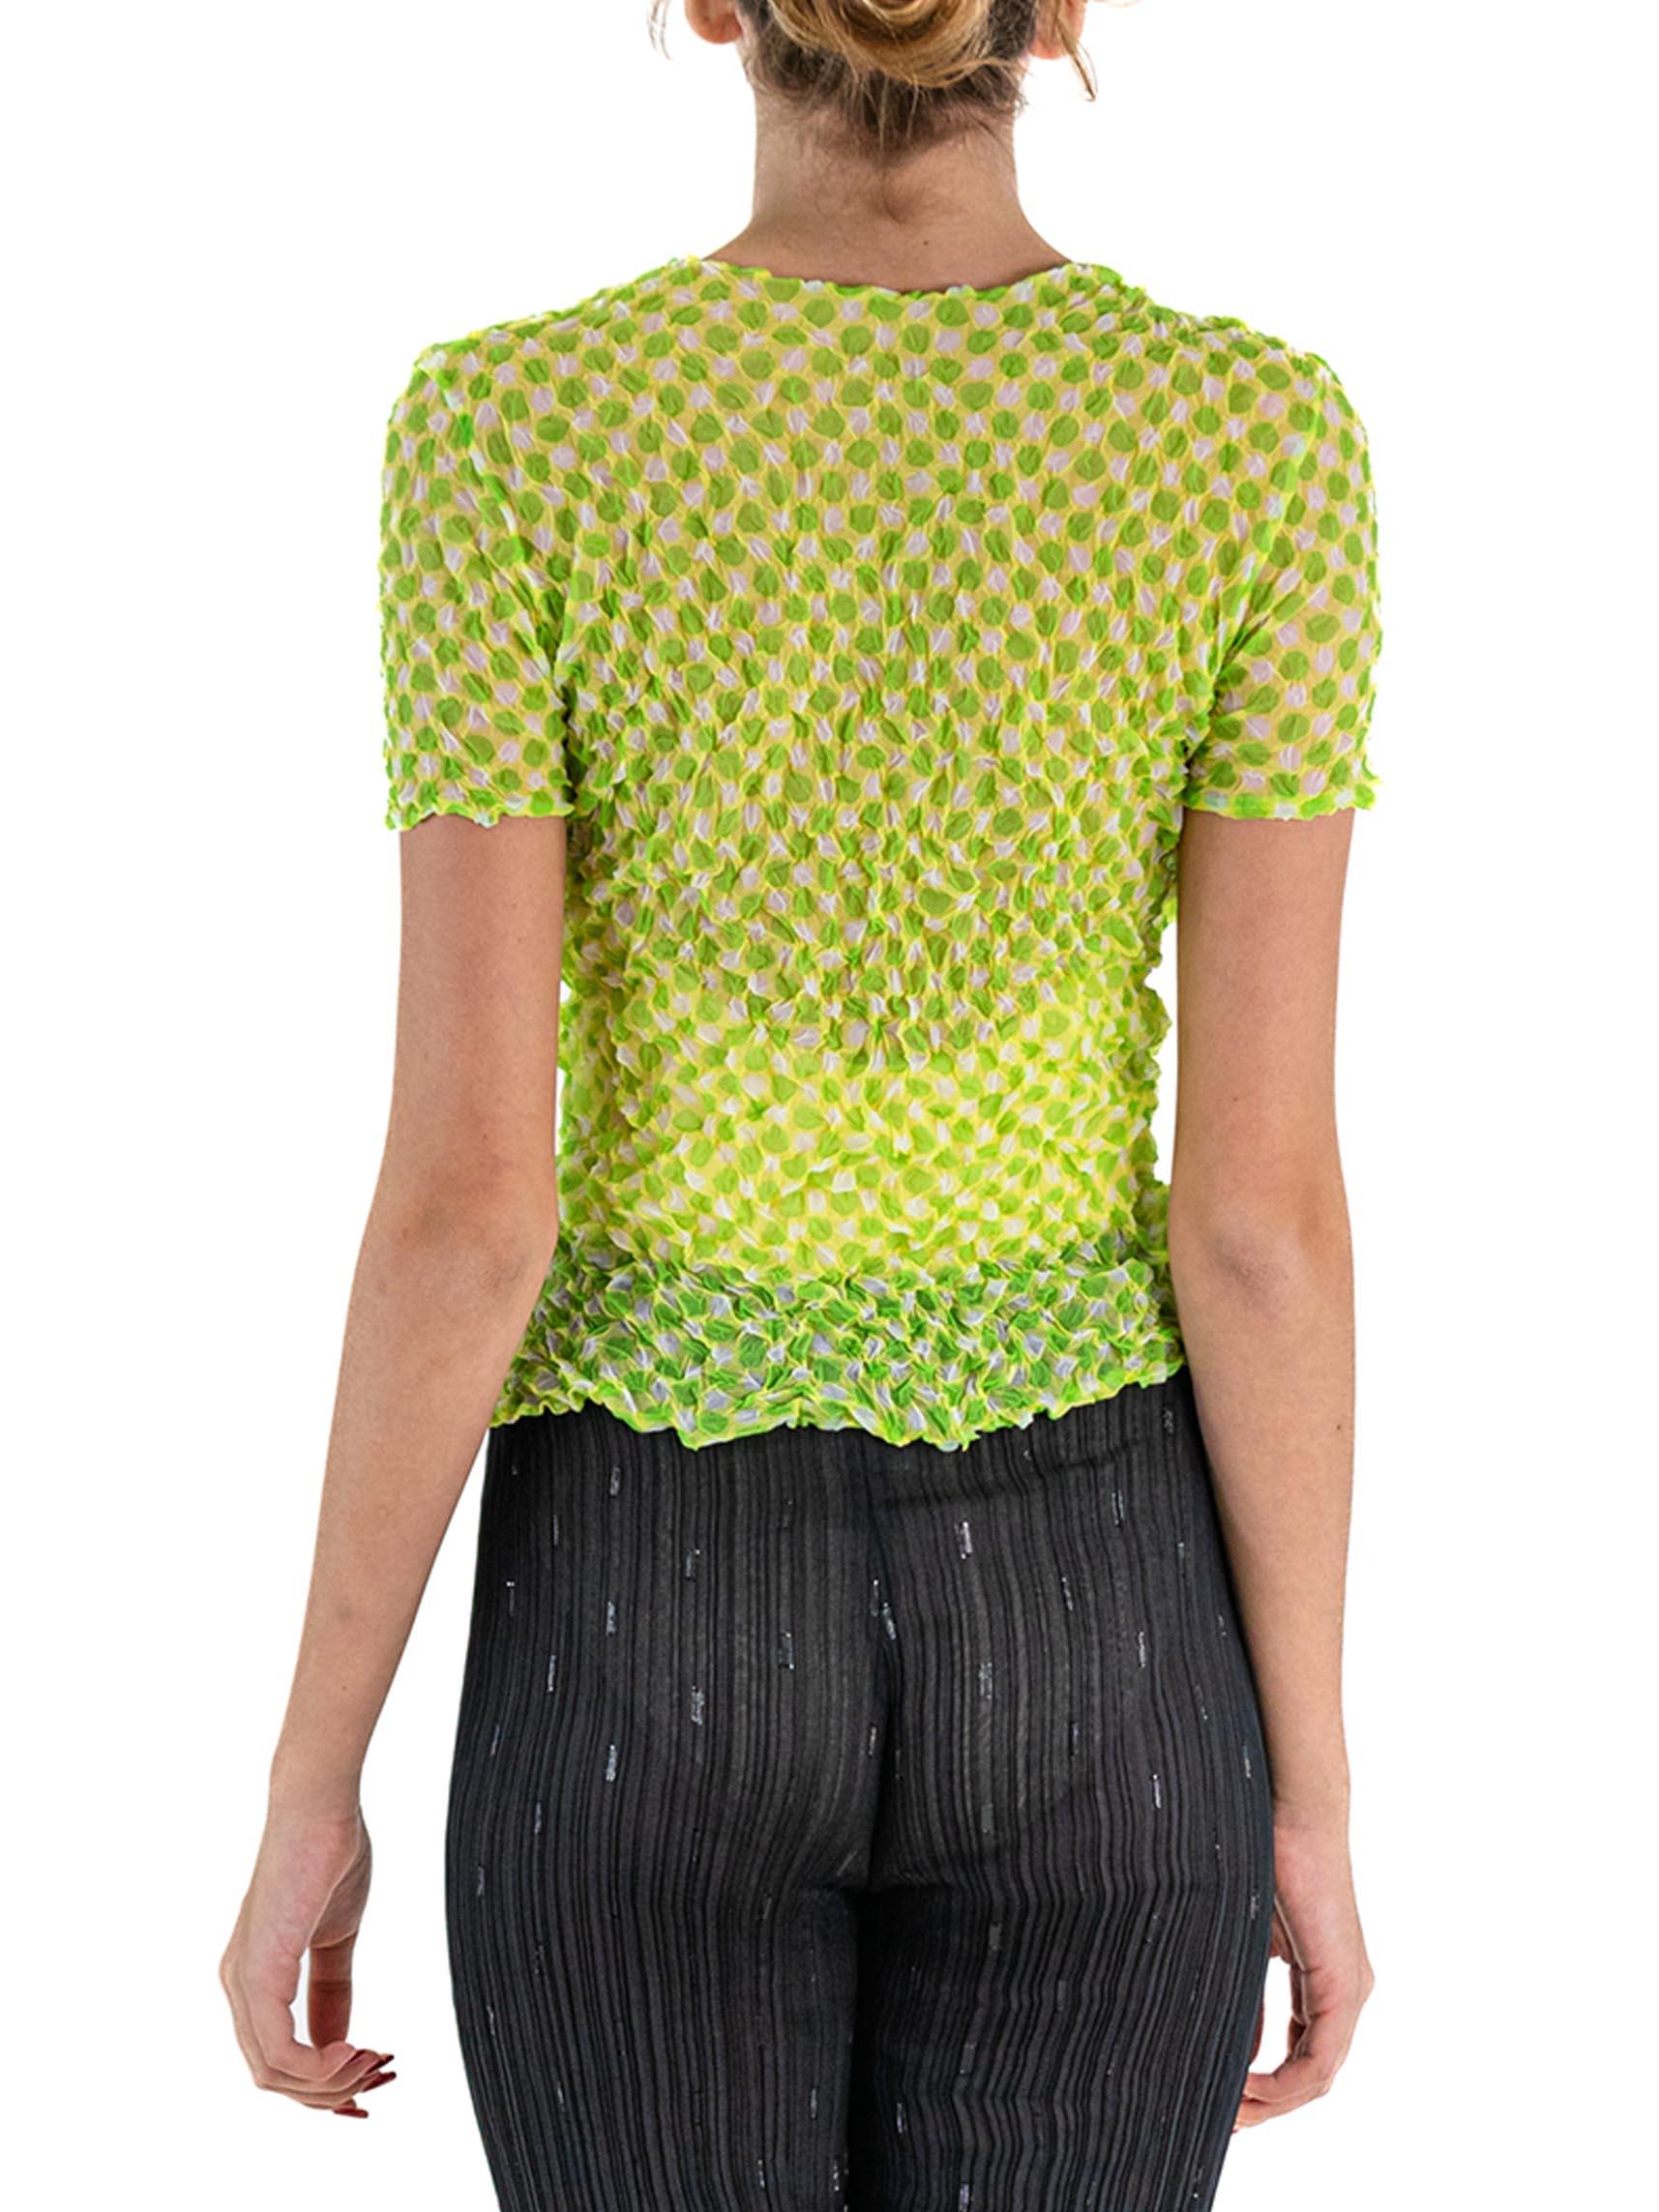 1990S ISSEY MIYAKE Lime Green Sheer Polyester Shrink Wrap Top With Polka Dots For Sale 3